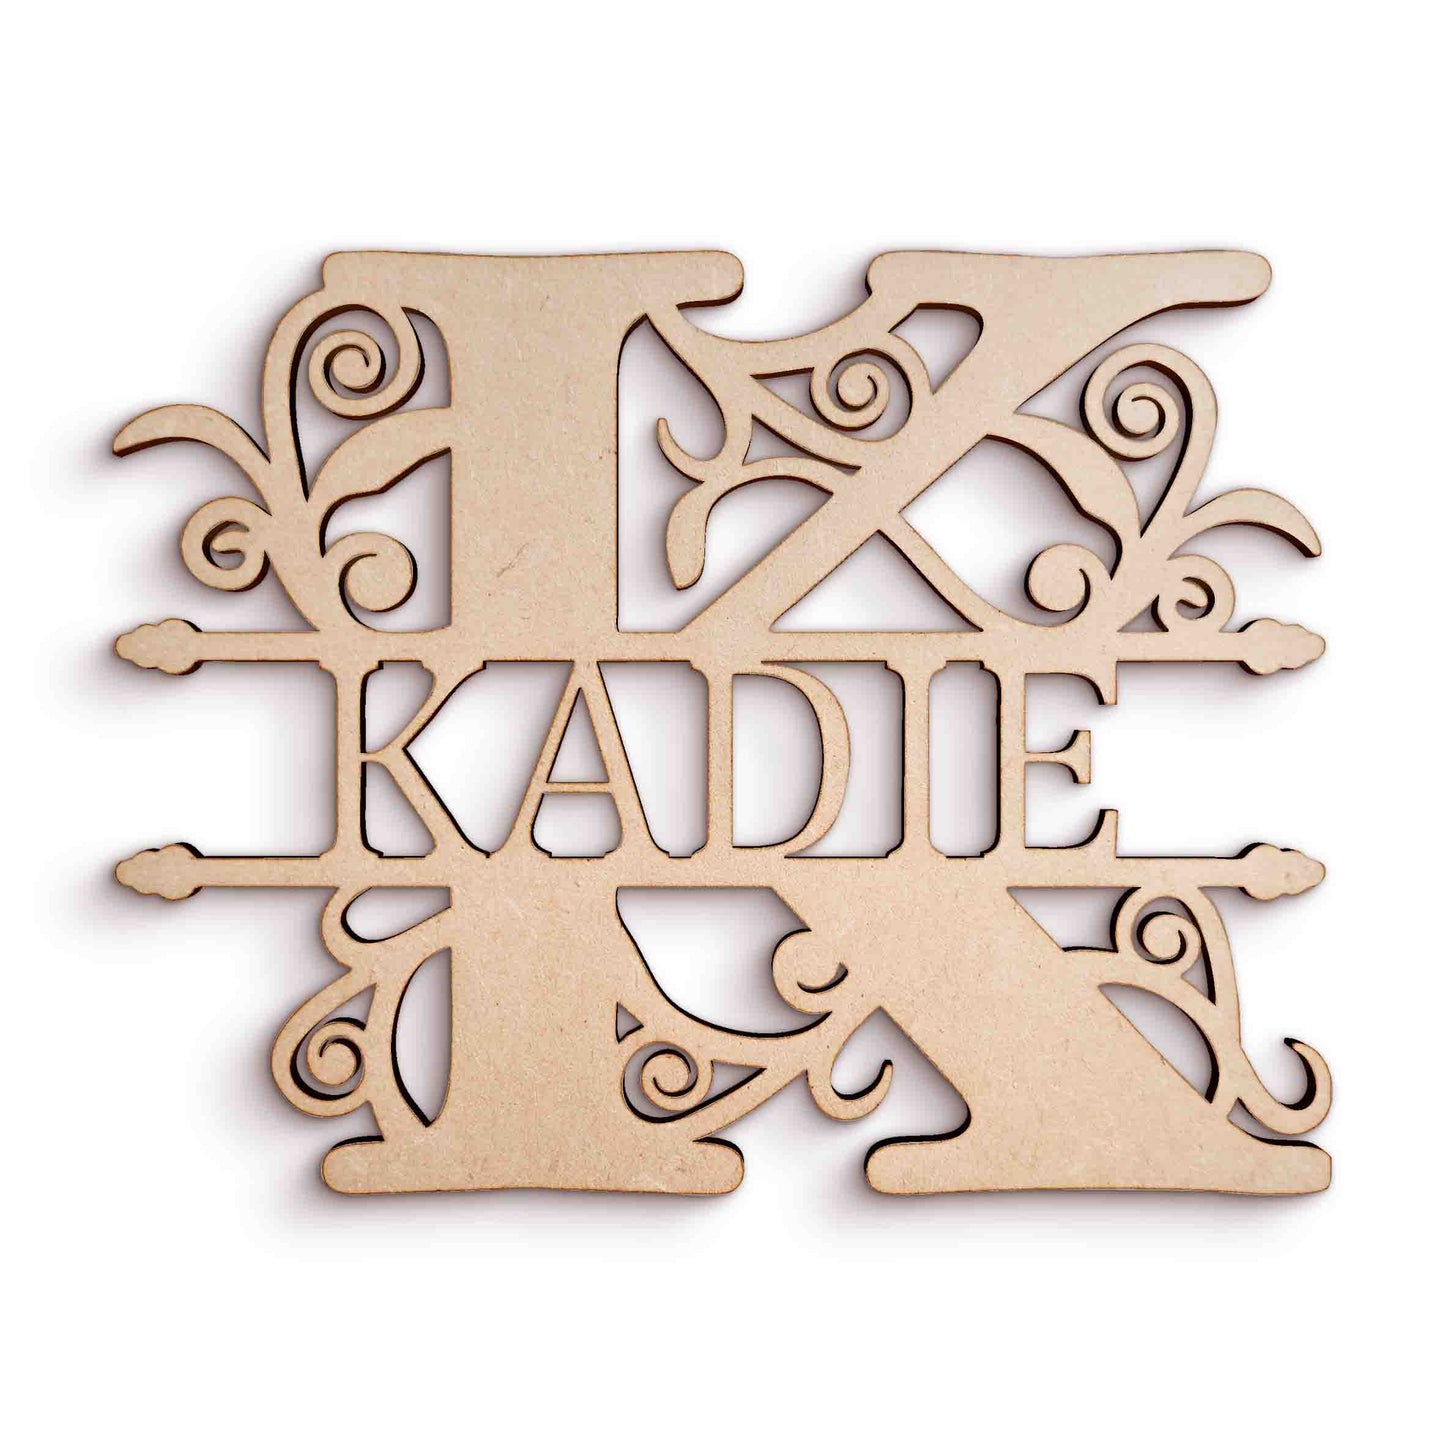 Personalised Monogram wooden craft shape Letters.